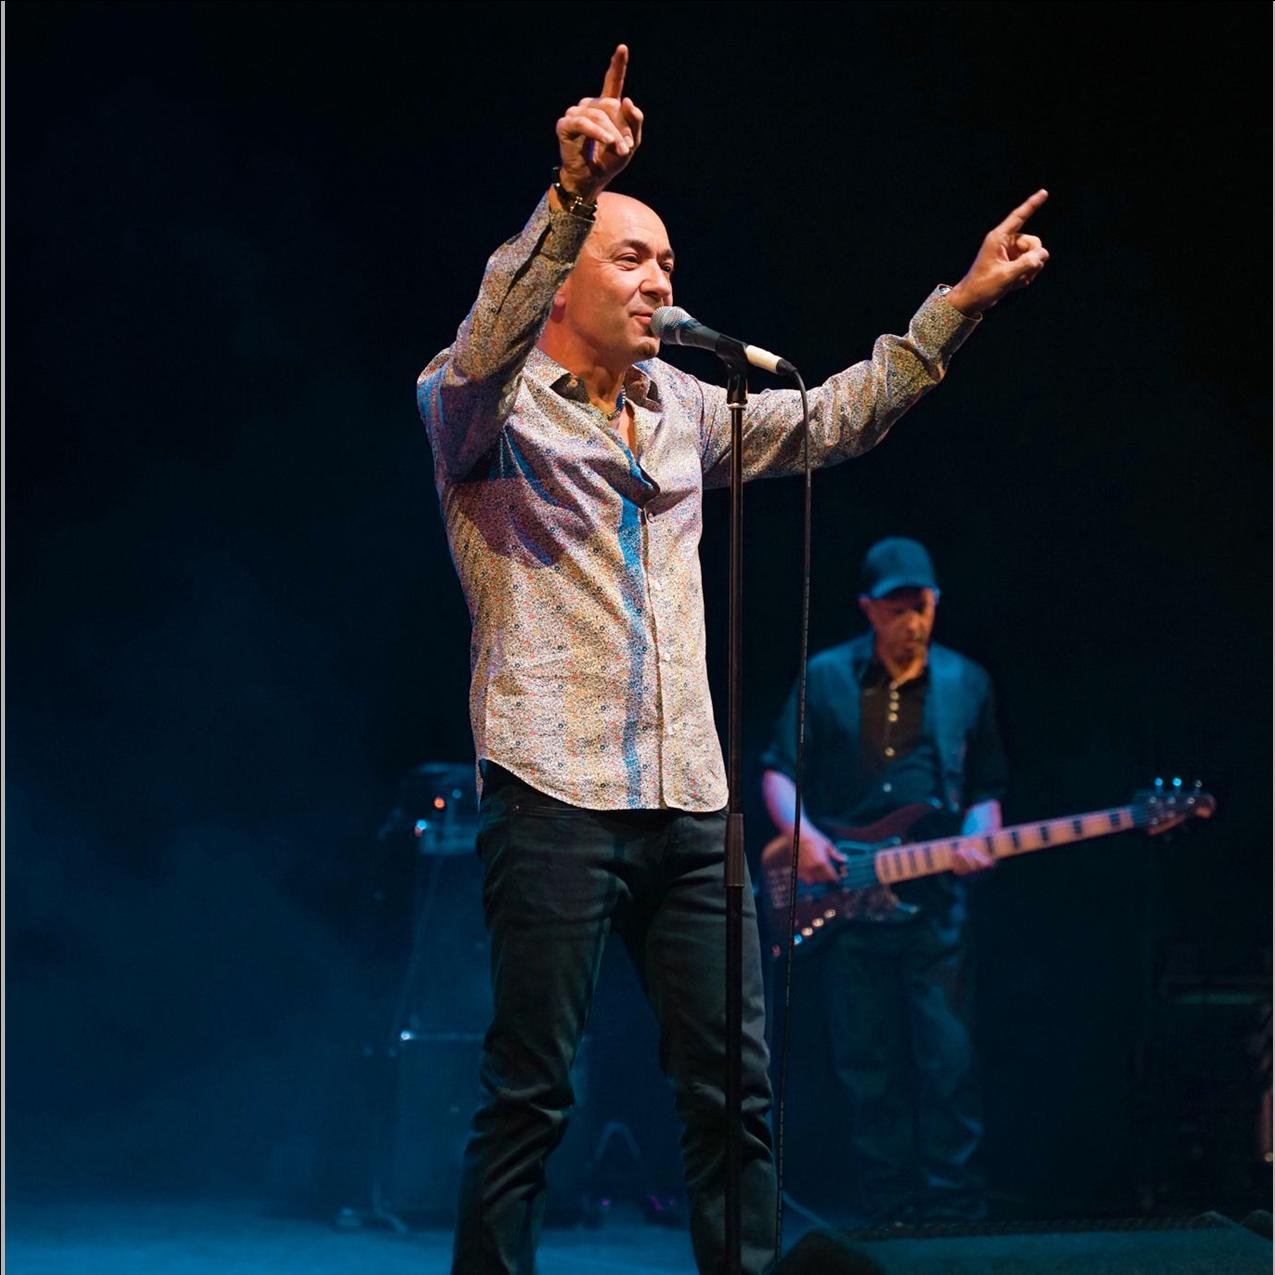 Image name Kenny Thomas Him Tour at Grand Opera House York York the 1 image from the post Kenny Thomas - Him Tour at Grand Opera House, York, York in Yorkshire.com.